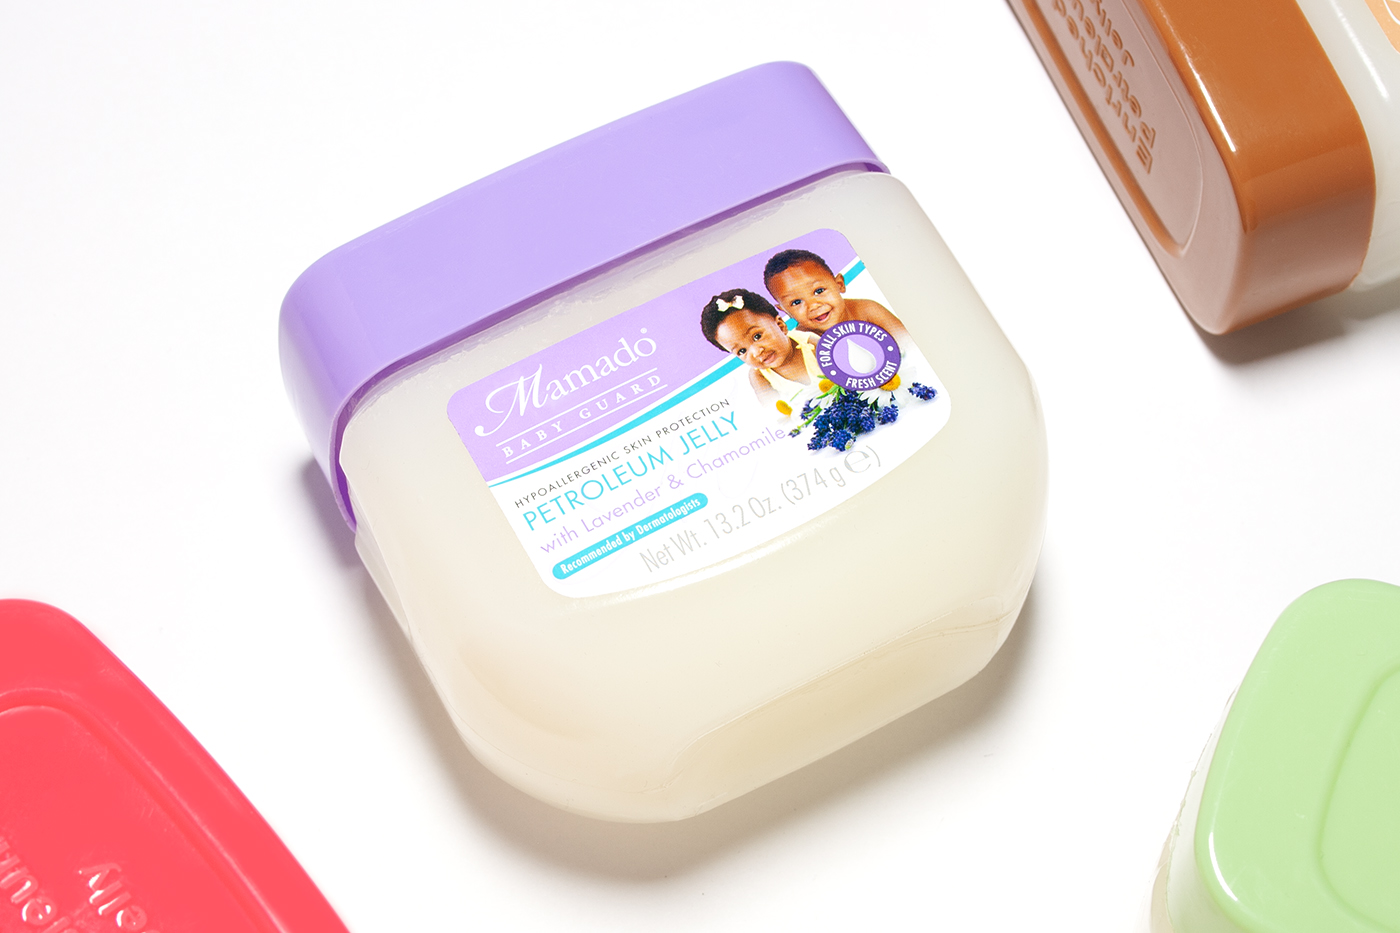 Close-up of Lavender & Chamomile petroleum jelly product featuring baby care label identity design graphics by Paul Cartwright Branding.